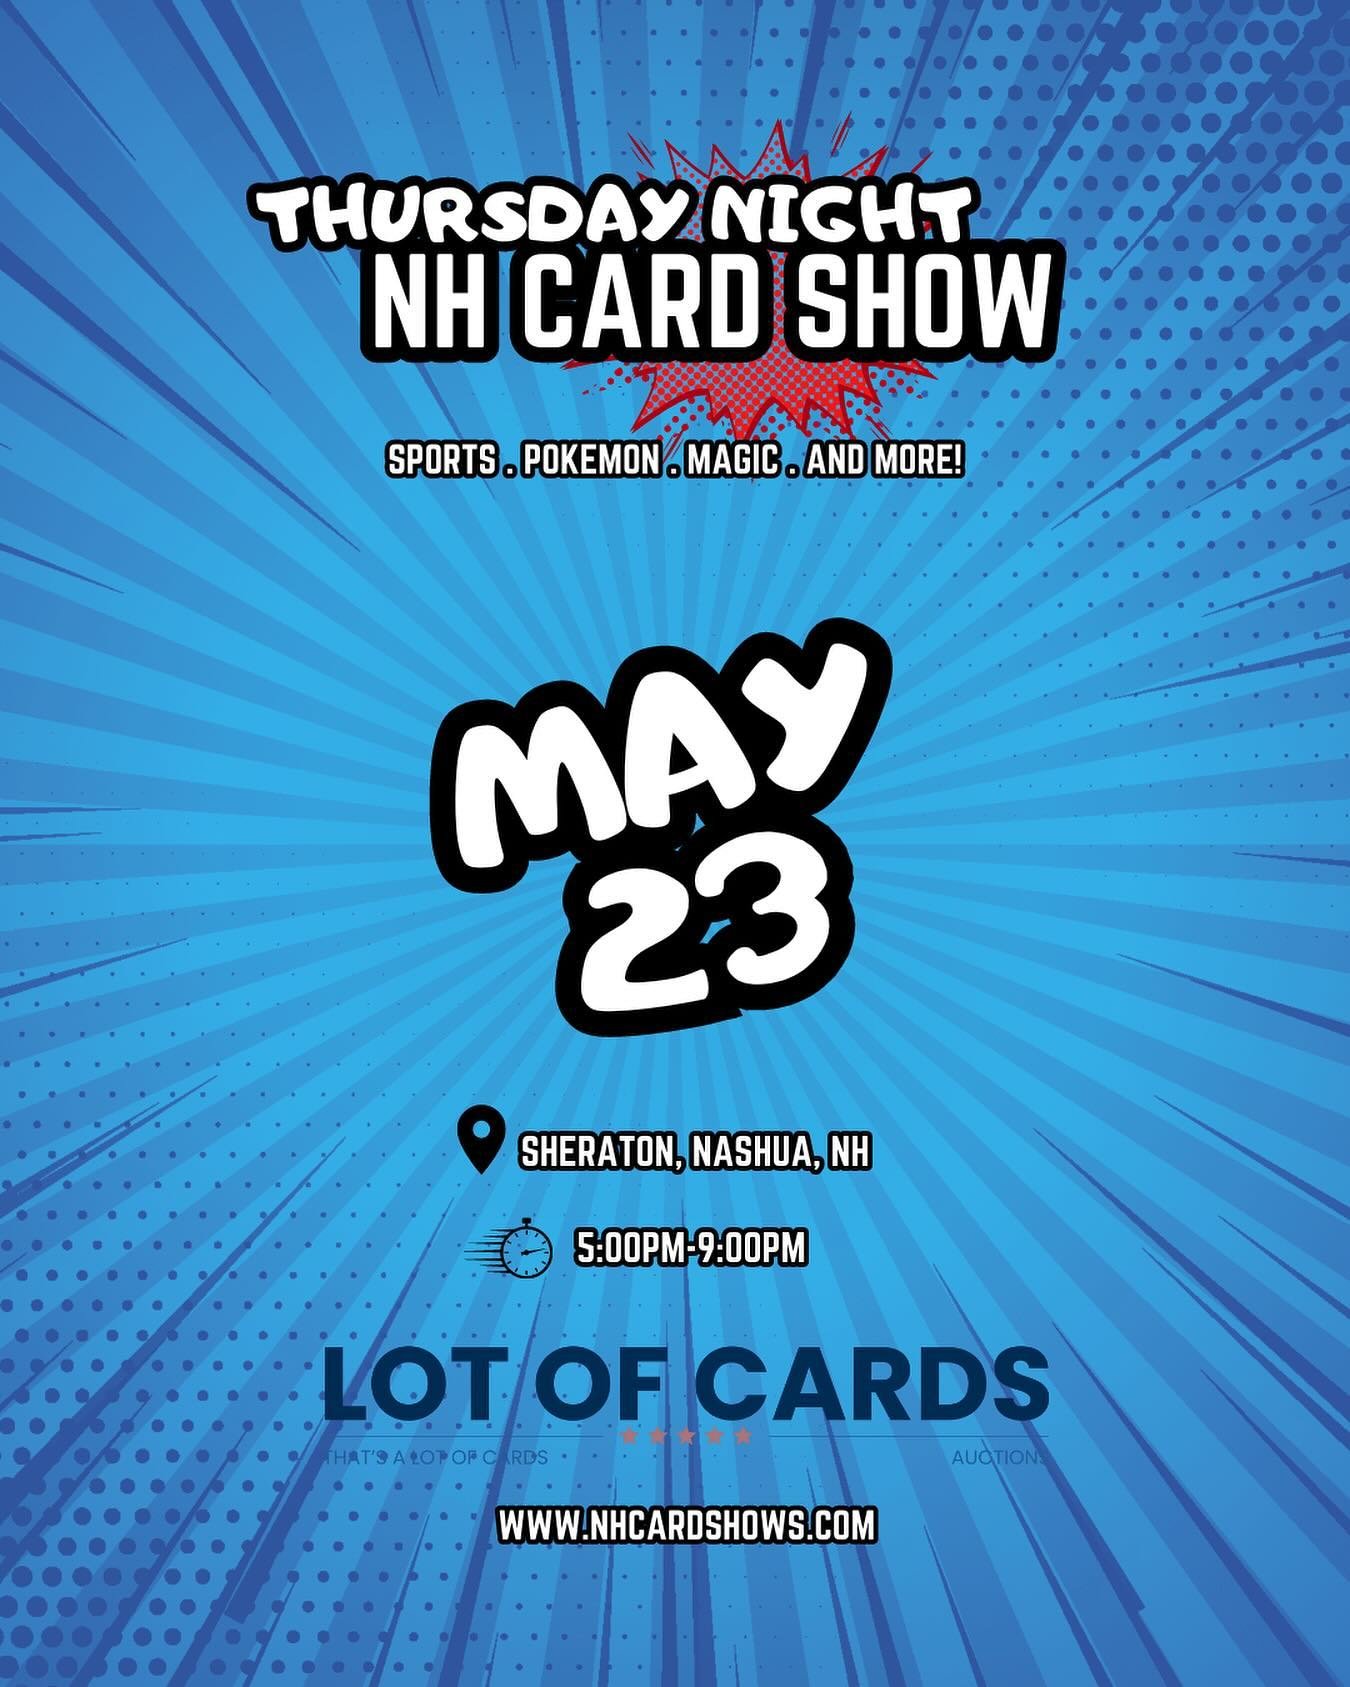 ‼️‼️‼️‼️‼️‼️ 

Attention all card enthusiasts! Next Card Show is May 23rd! Who will be joining us?

#cards #hobby #trading #whodoyoucollect #nashuanh #newengland #cardshow #lotofcards #baseball #basketball #football #soccer #hockey #nfl #mlb #nba #nh